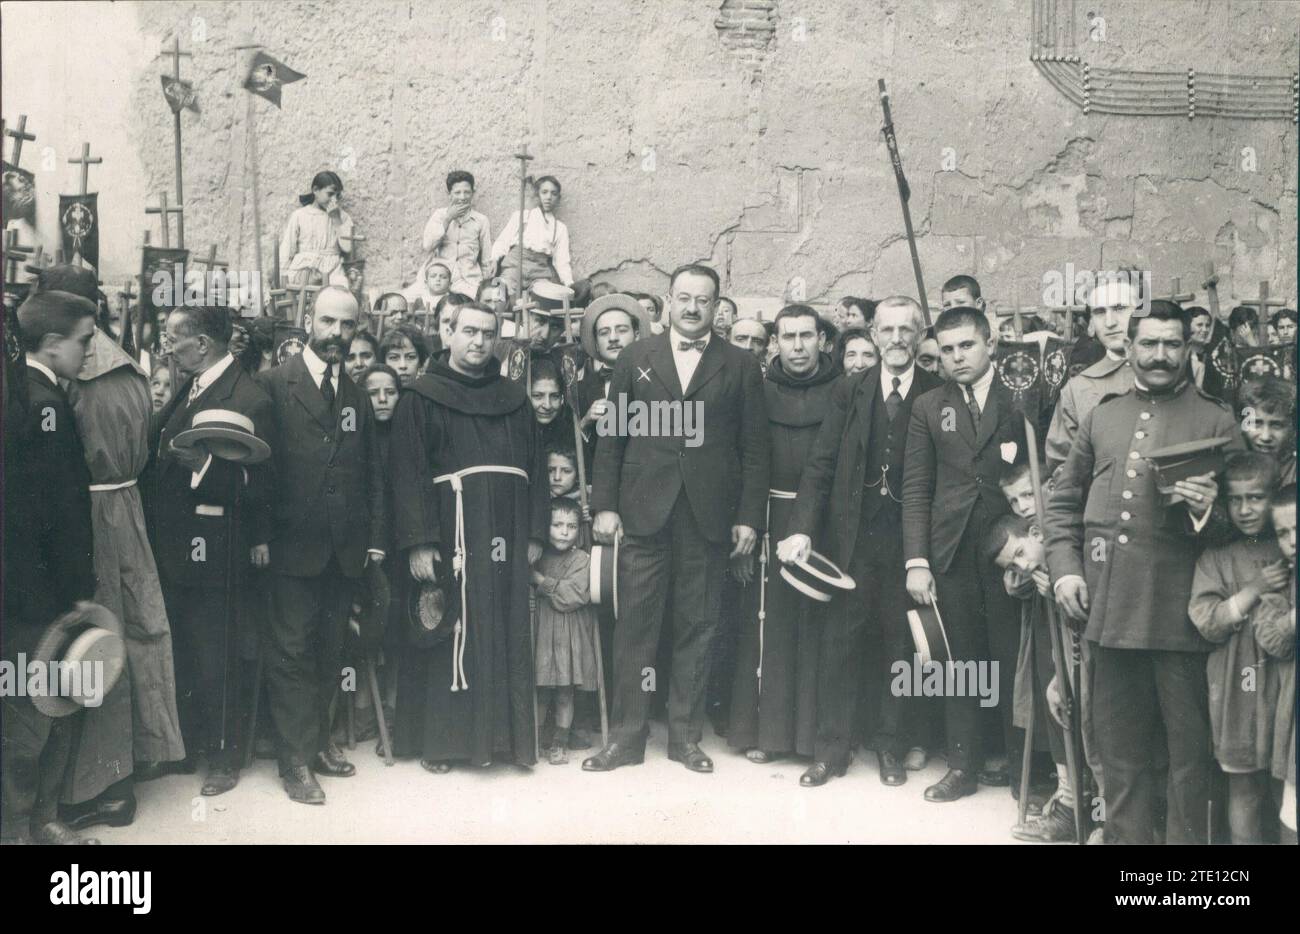 09/12/1919. Madrid. In the Schools of the third order of Saint Francis. Mayor Mr. Garrido (X) with the Professors of this institution at the festival they celebrated yesterday. Credit: Album / Archivo ABC / José Zegri Stock Photo